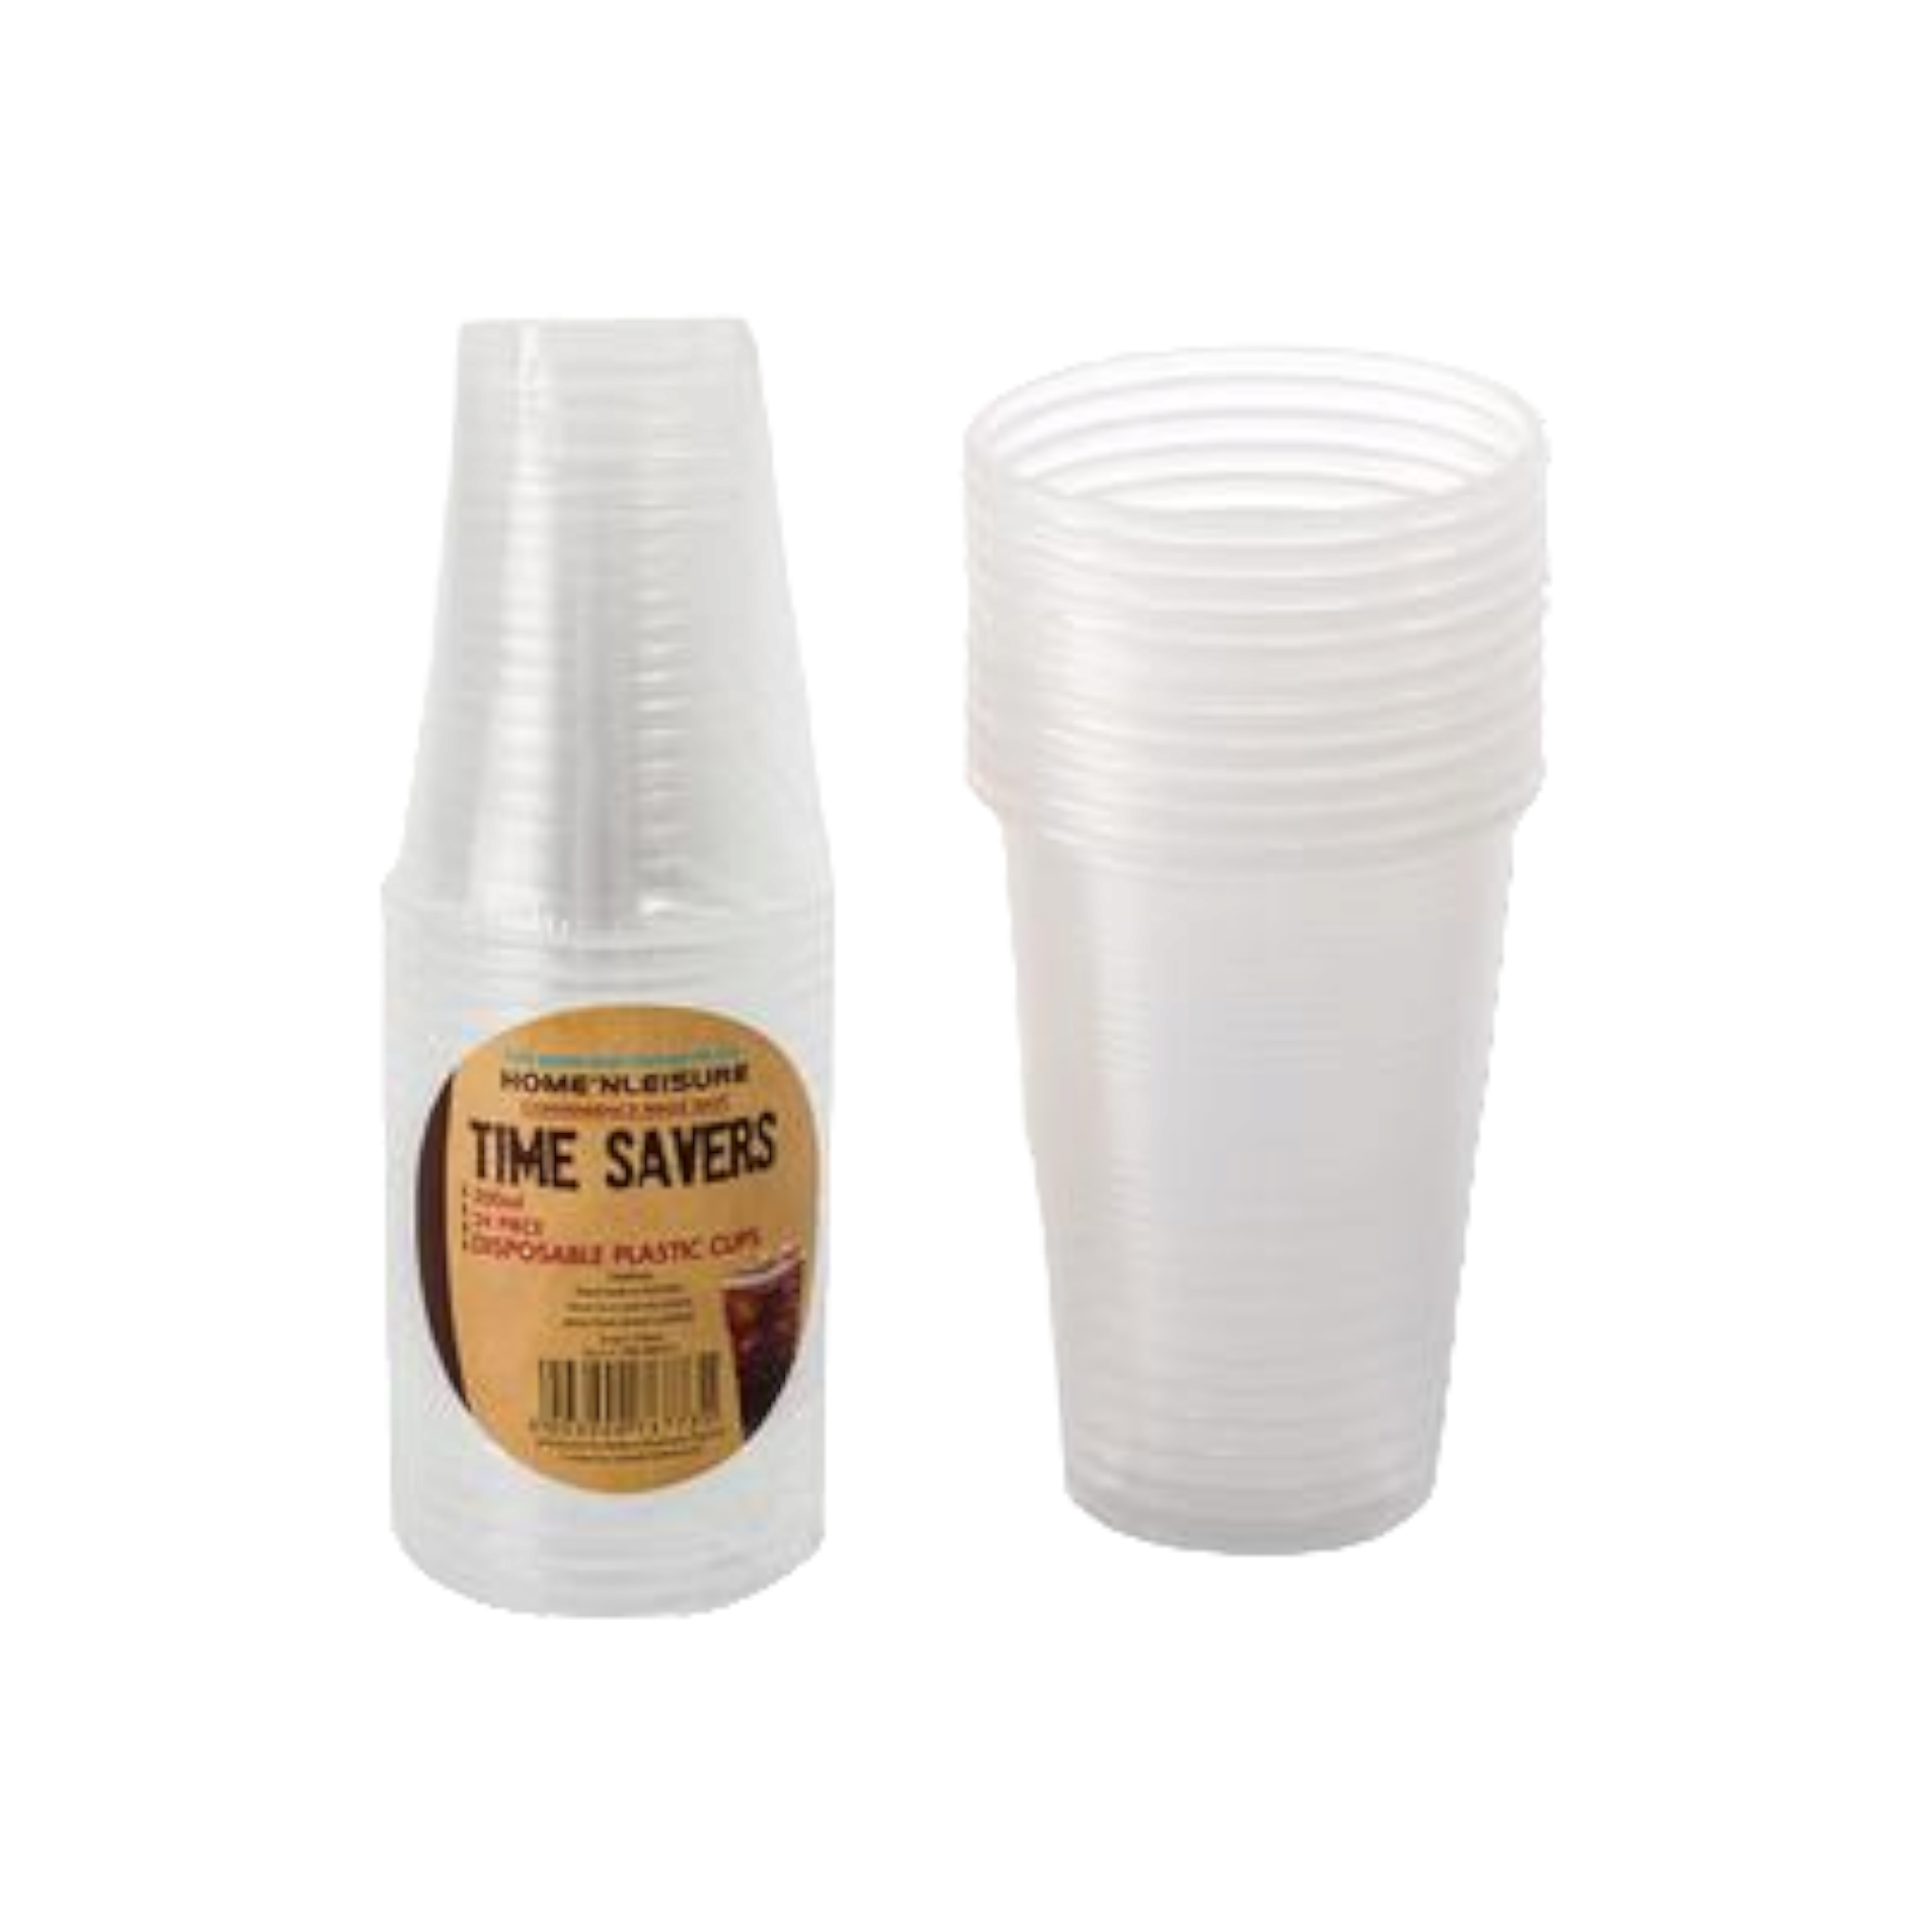 Time Savers 200ml Disposable Picnic Plastic Party Cup 24pack